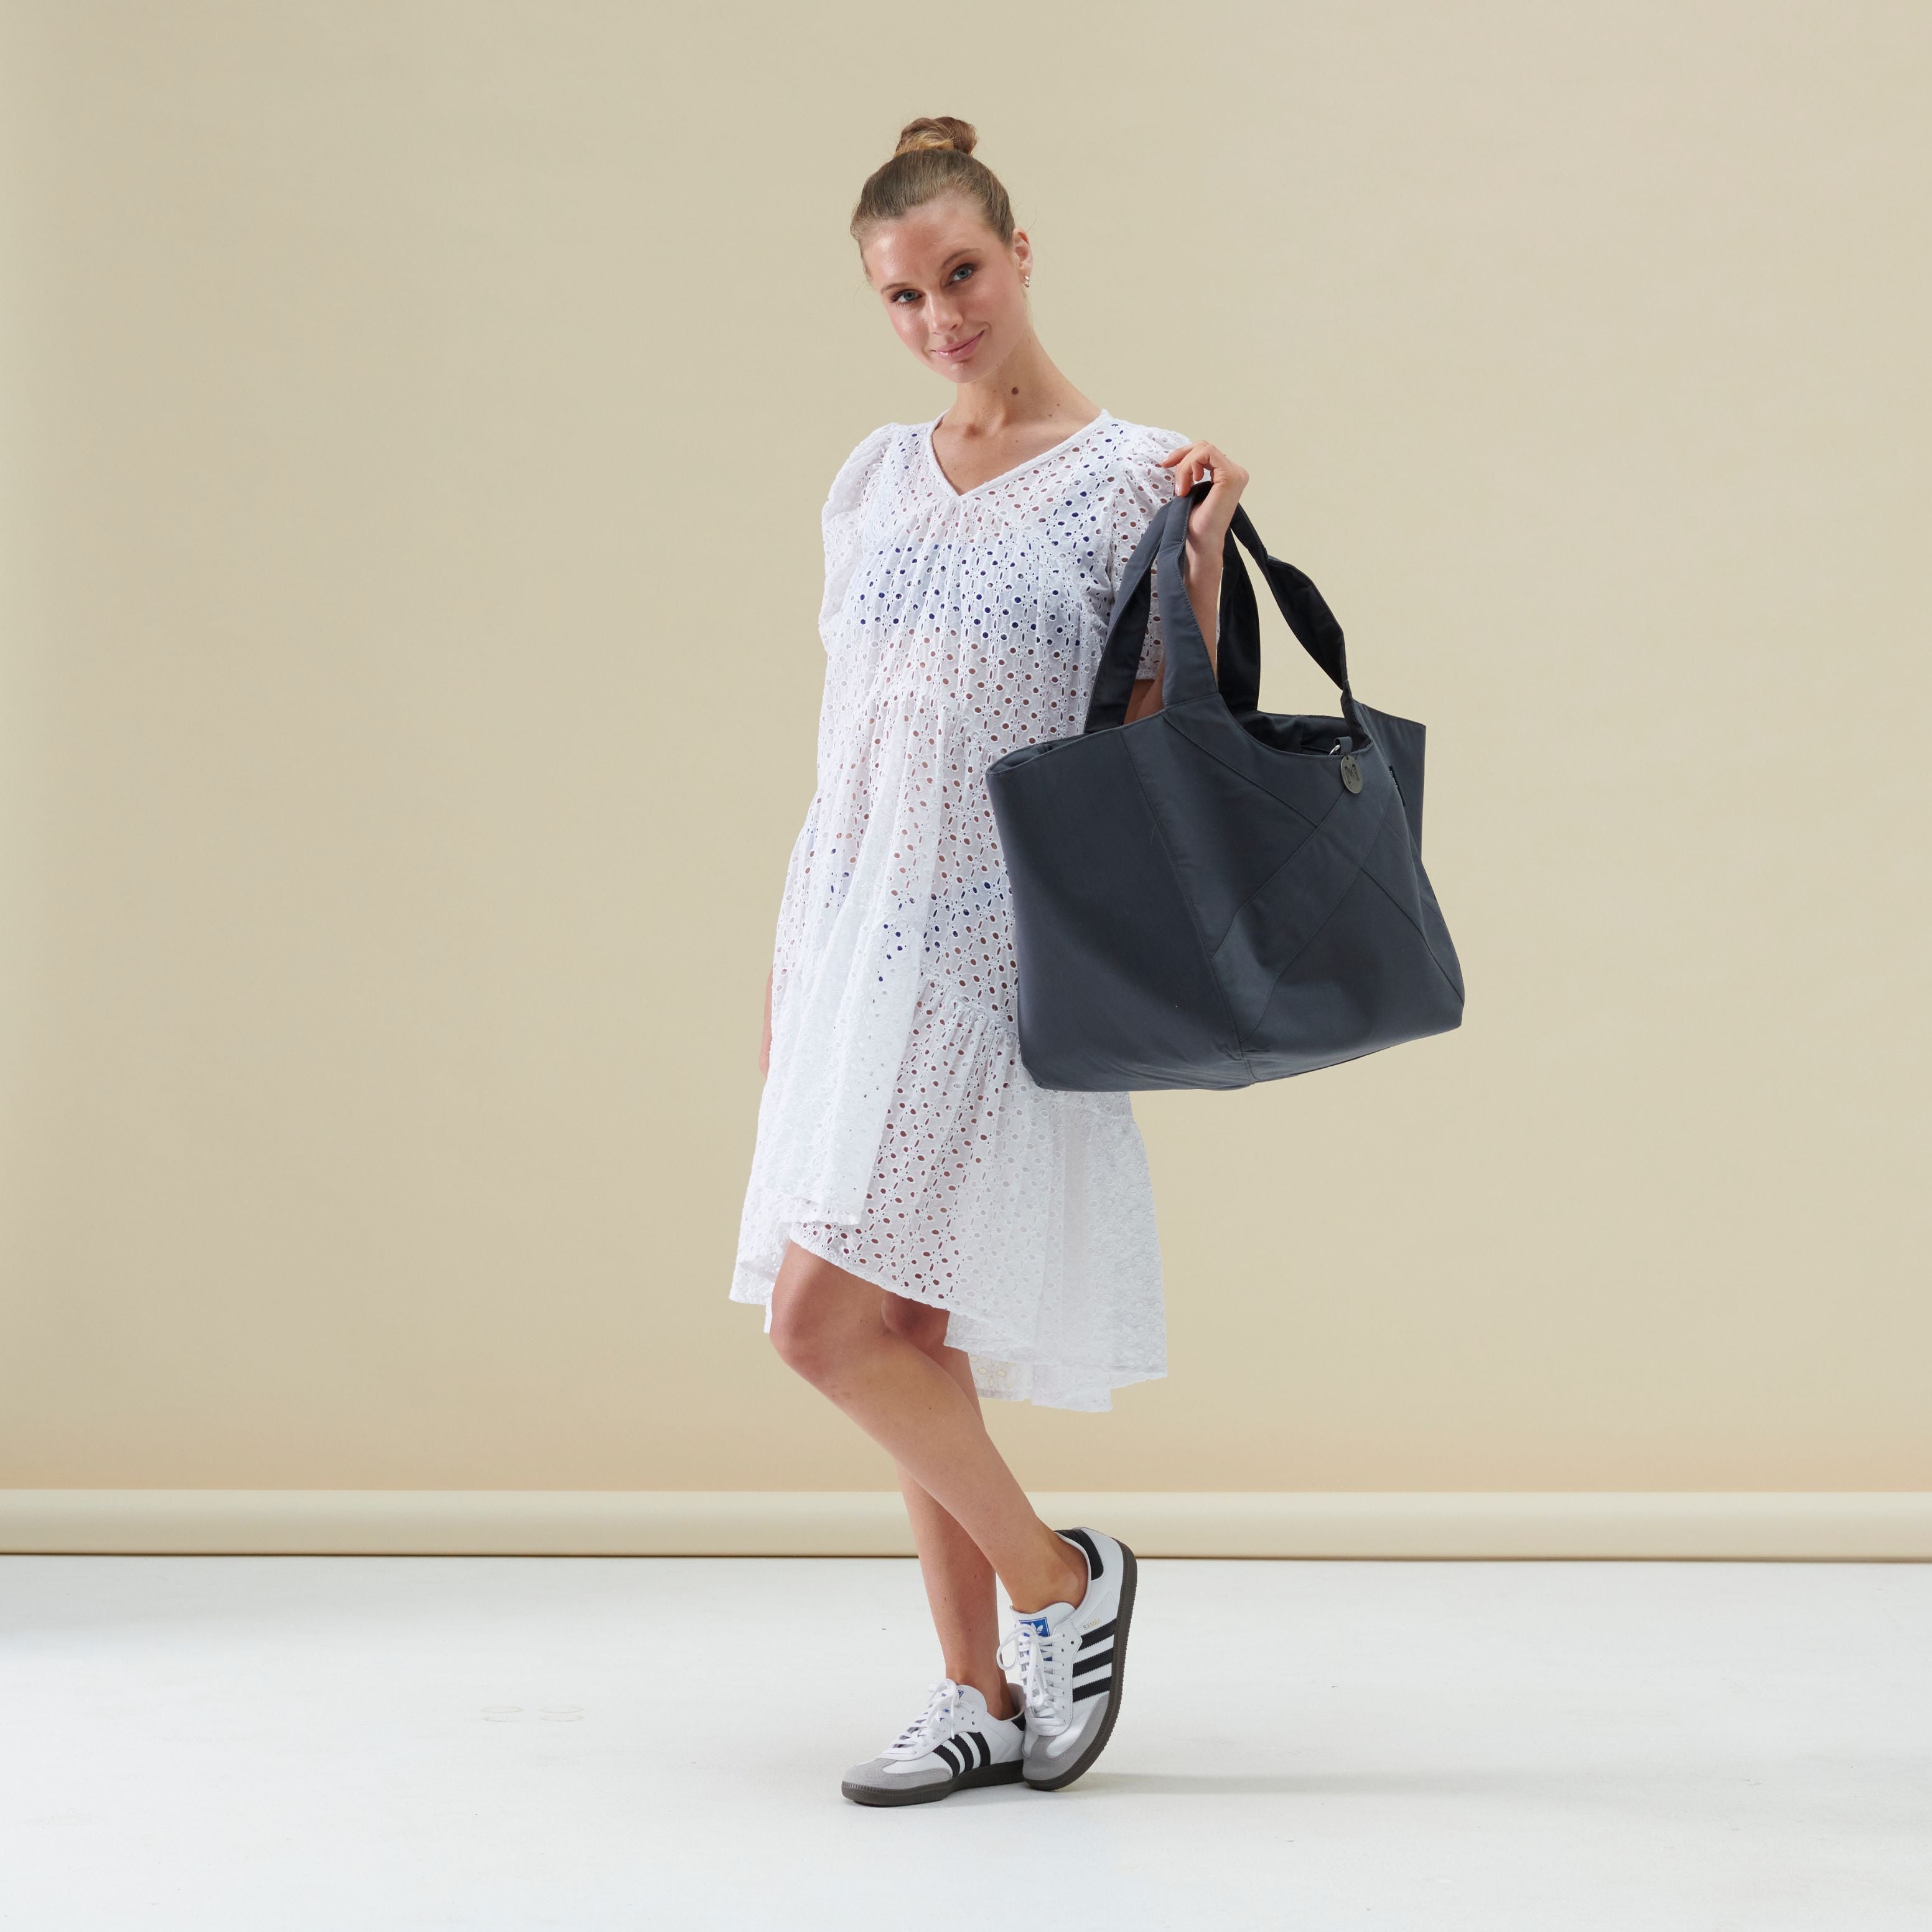 Cove Carry-All - Charcoal Grey (FREE Petite for Mother's Day! SAVE $119)